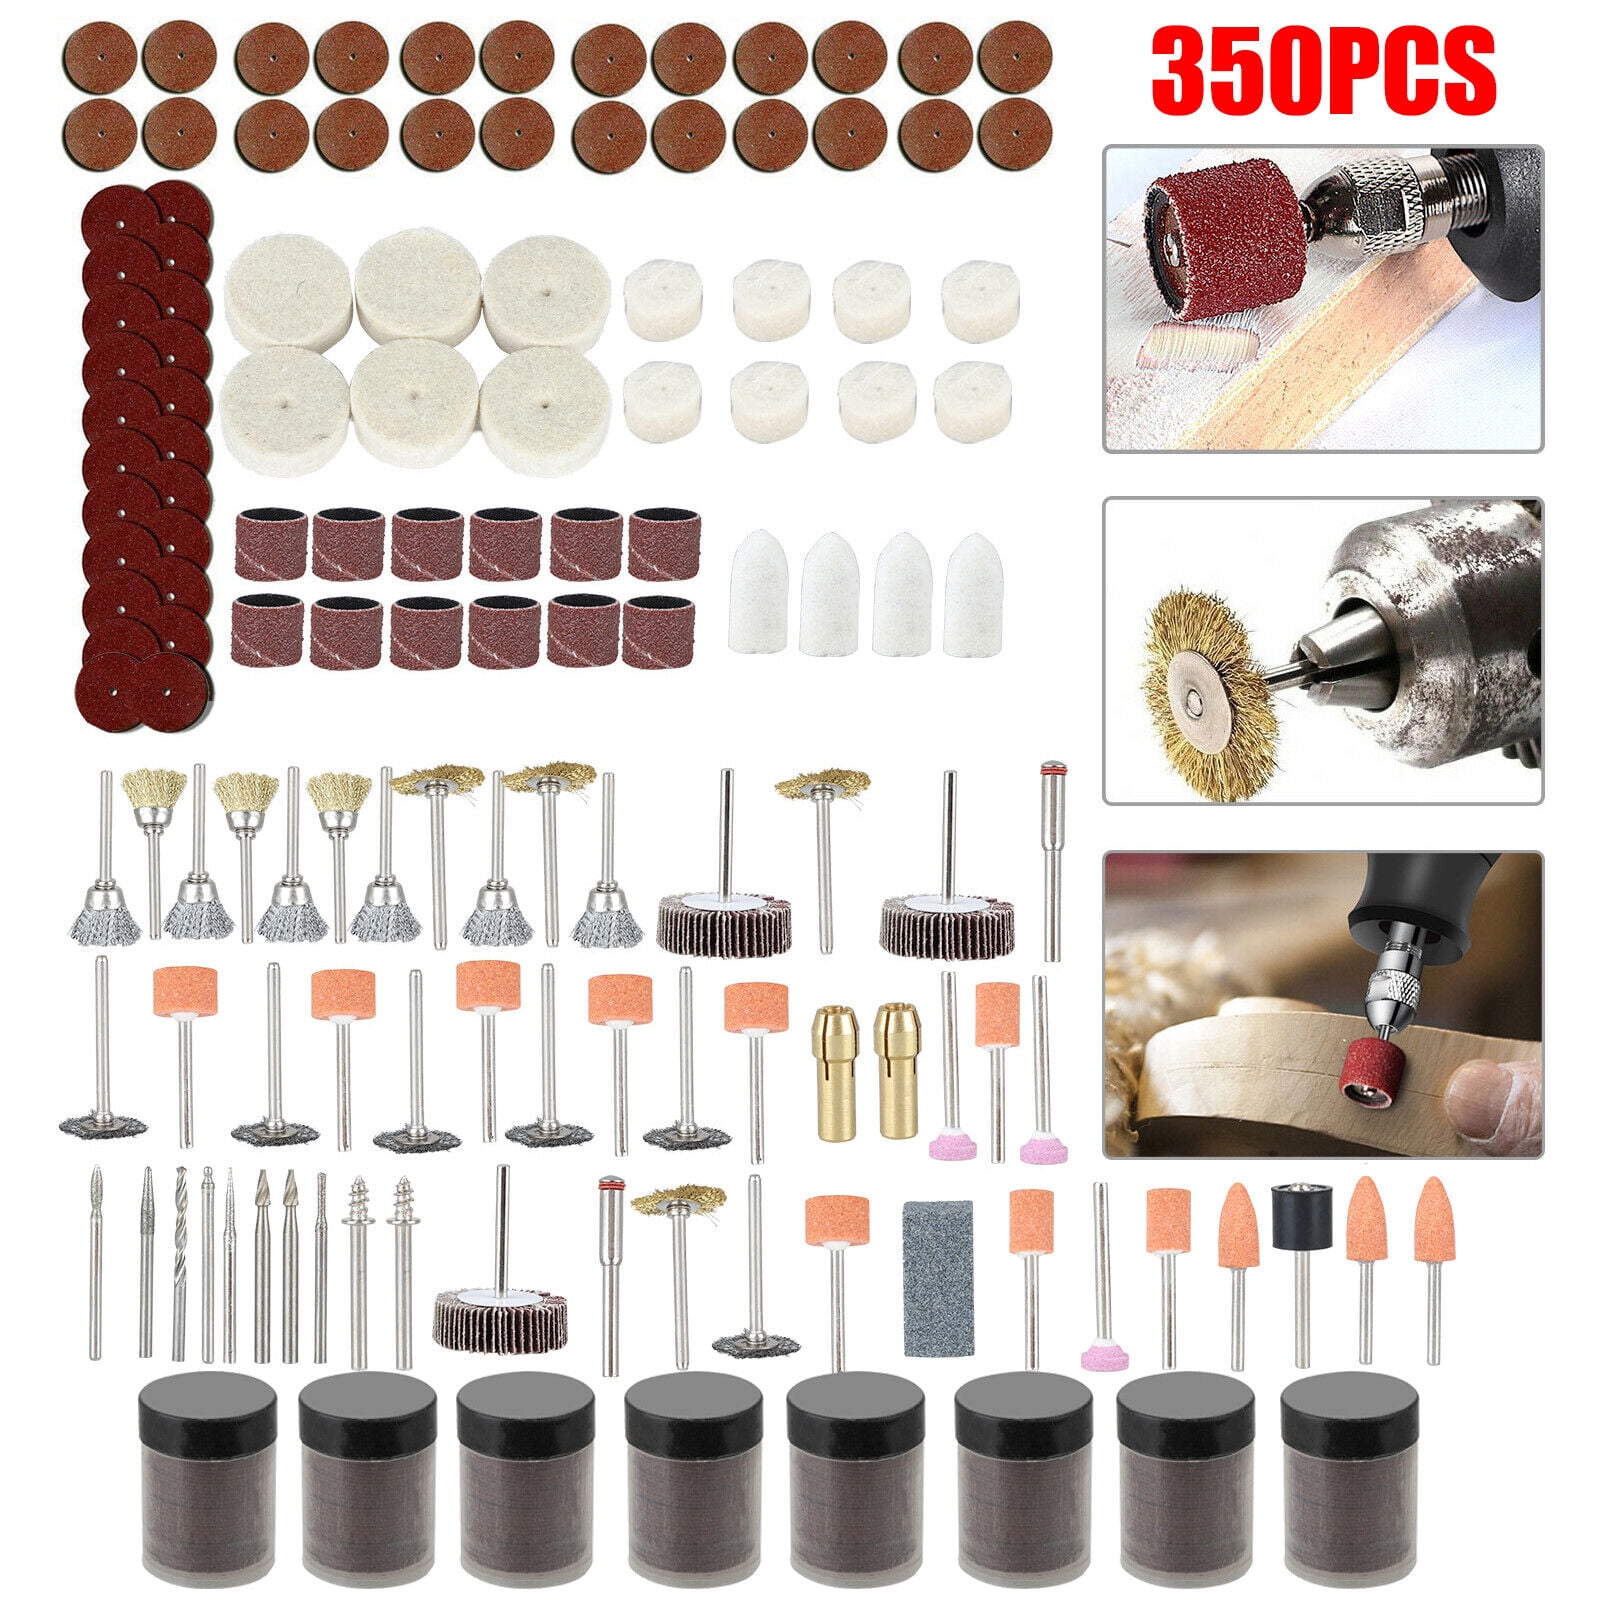 Dropship 228Pcs Rotary Accessory Tool Kit For Dremel For Grinding